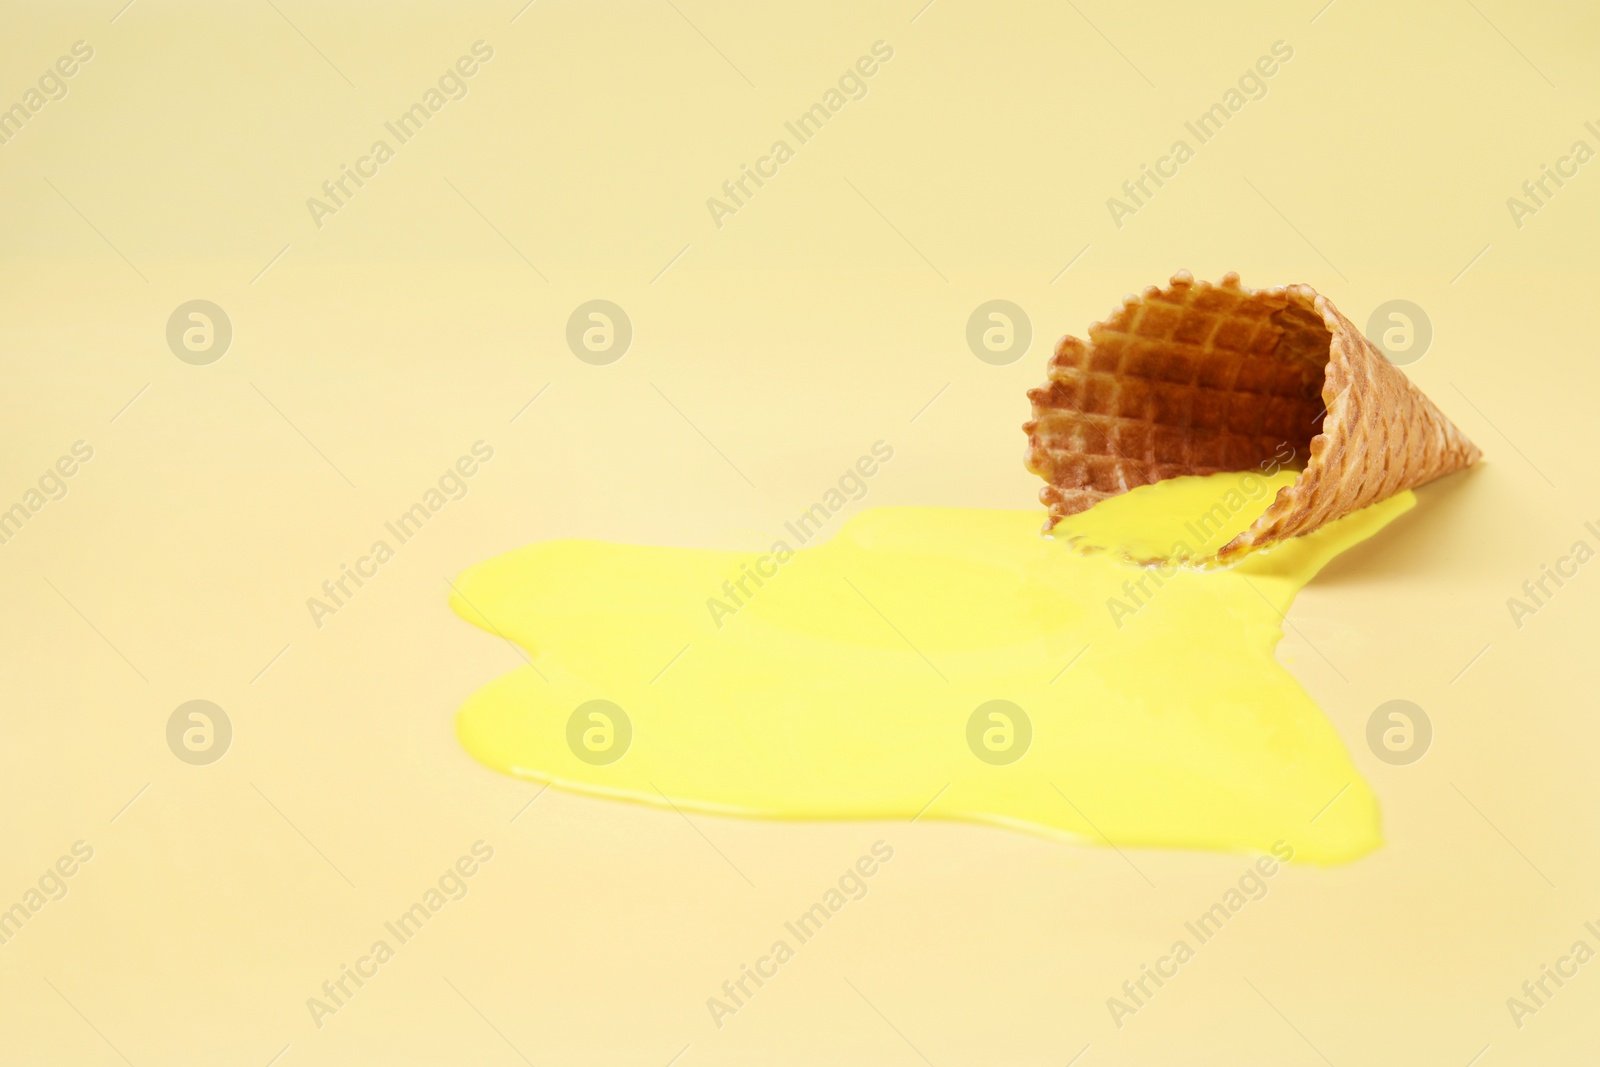 Photo of Melted ice cream and wafer cone on yellow background, space for text